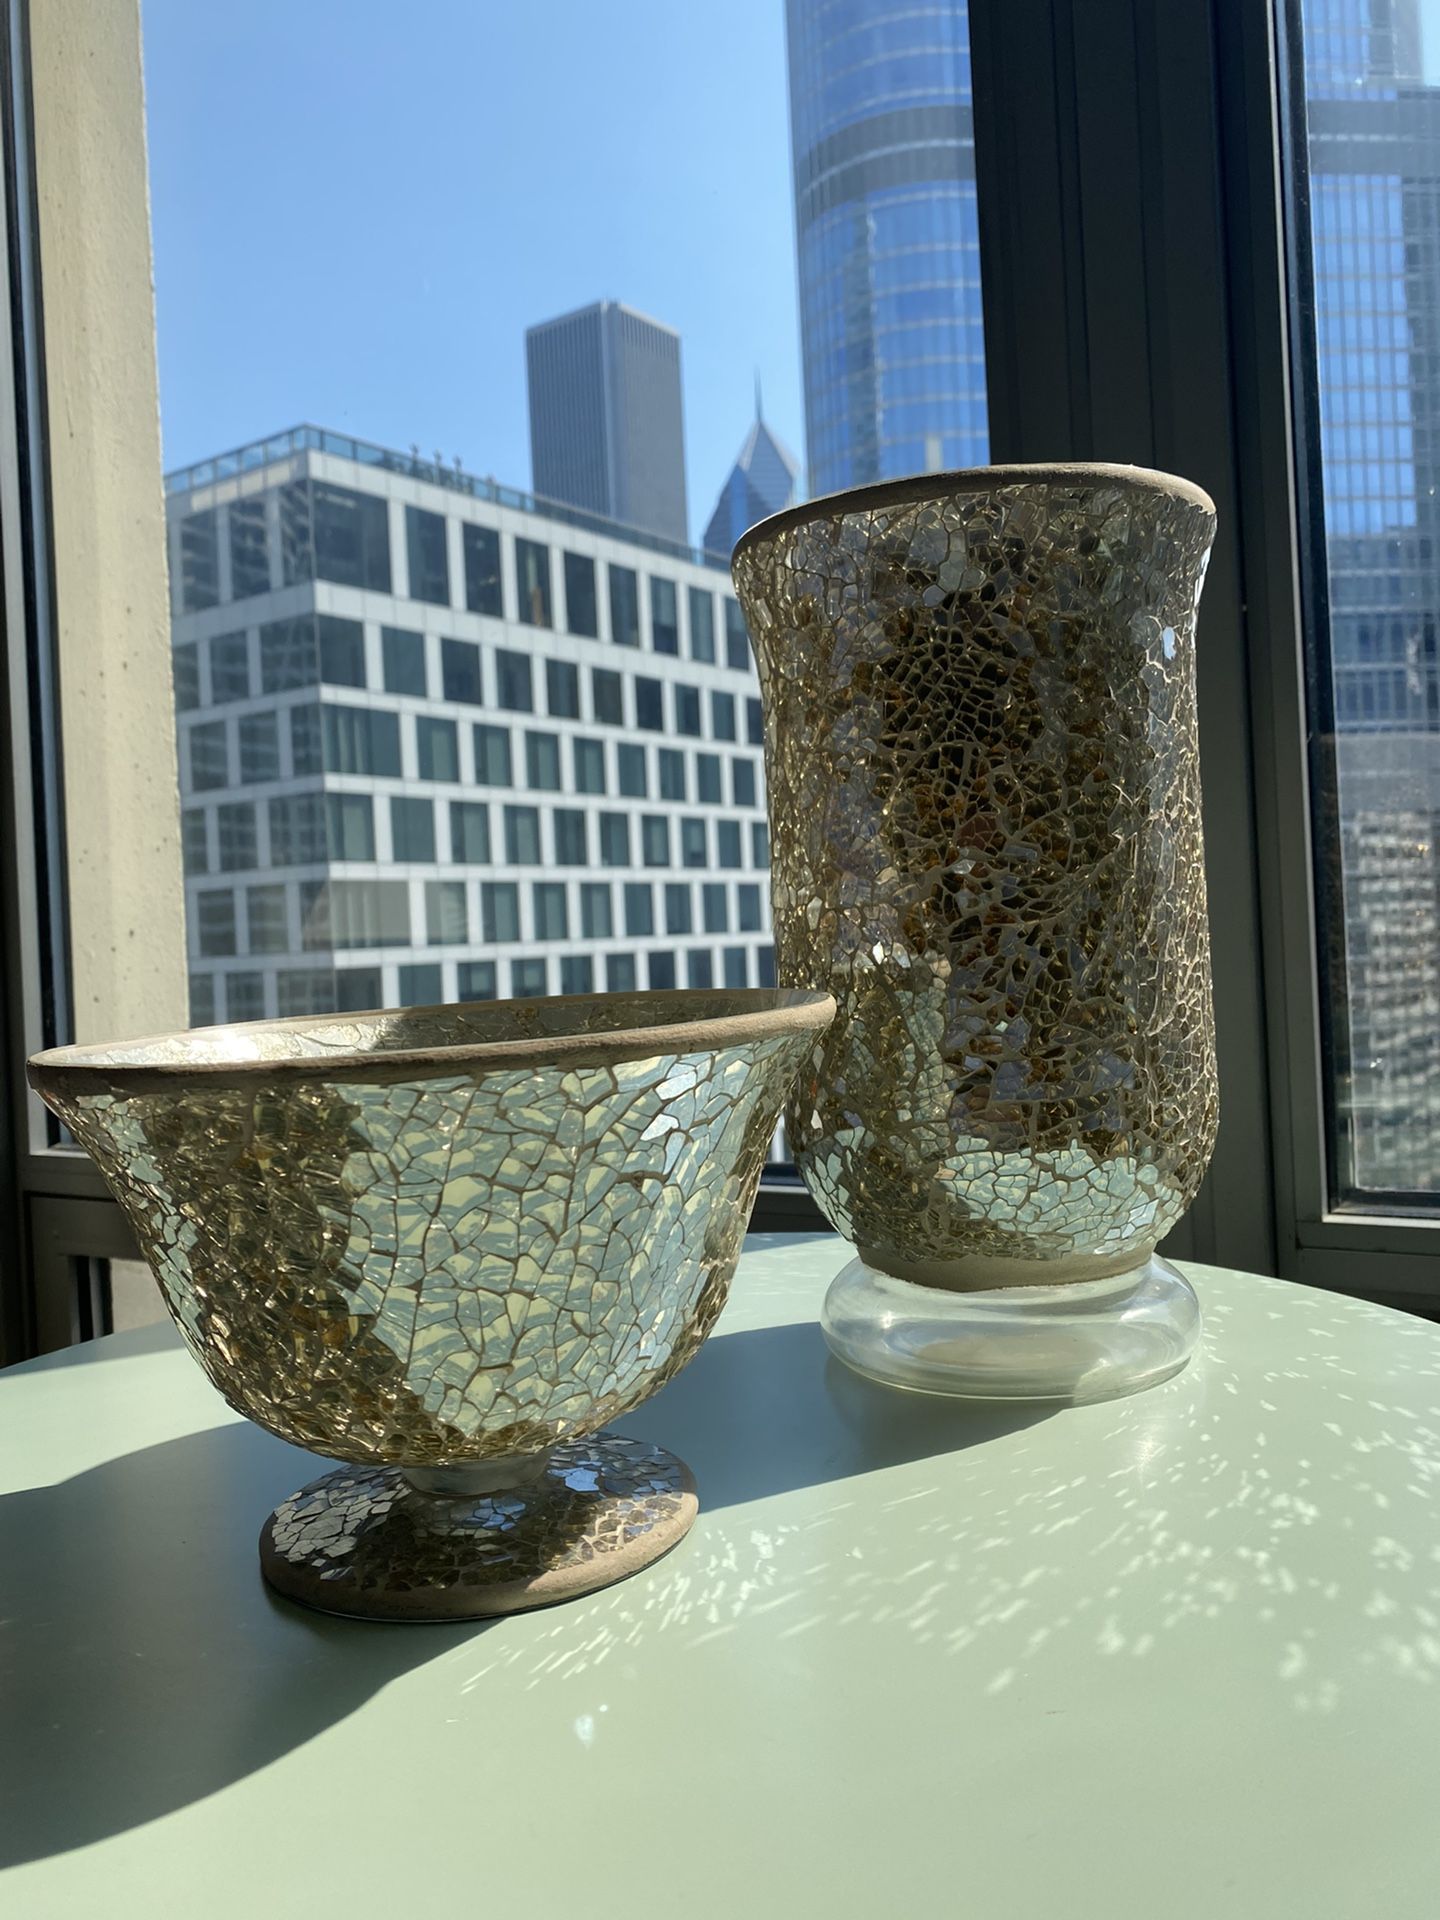 Decorative Vase And Bowl With Gold Reflective Design